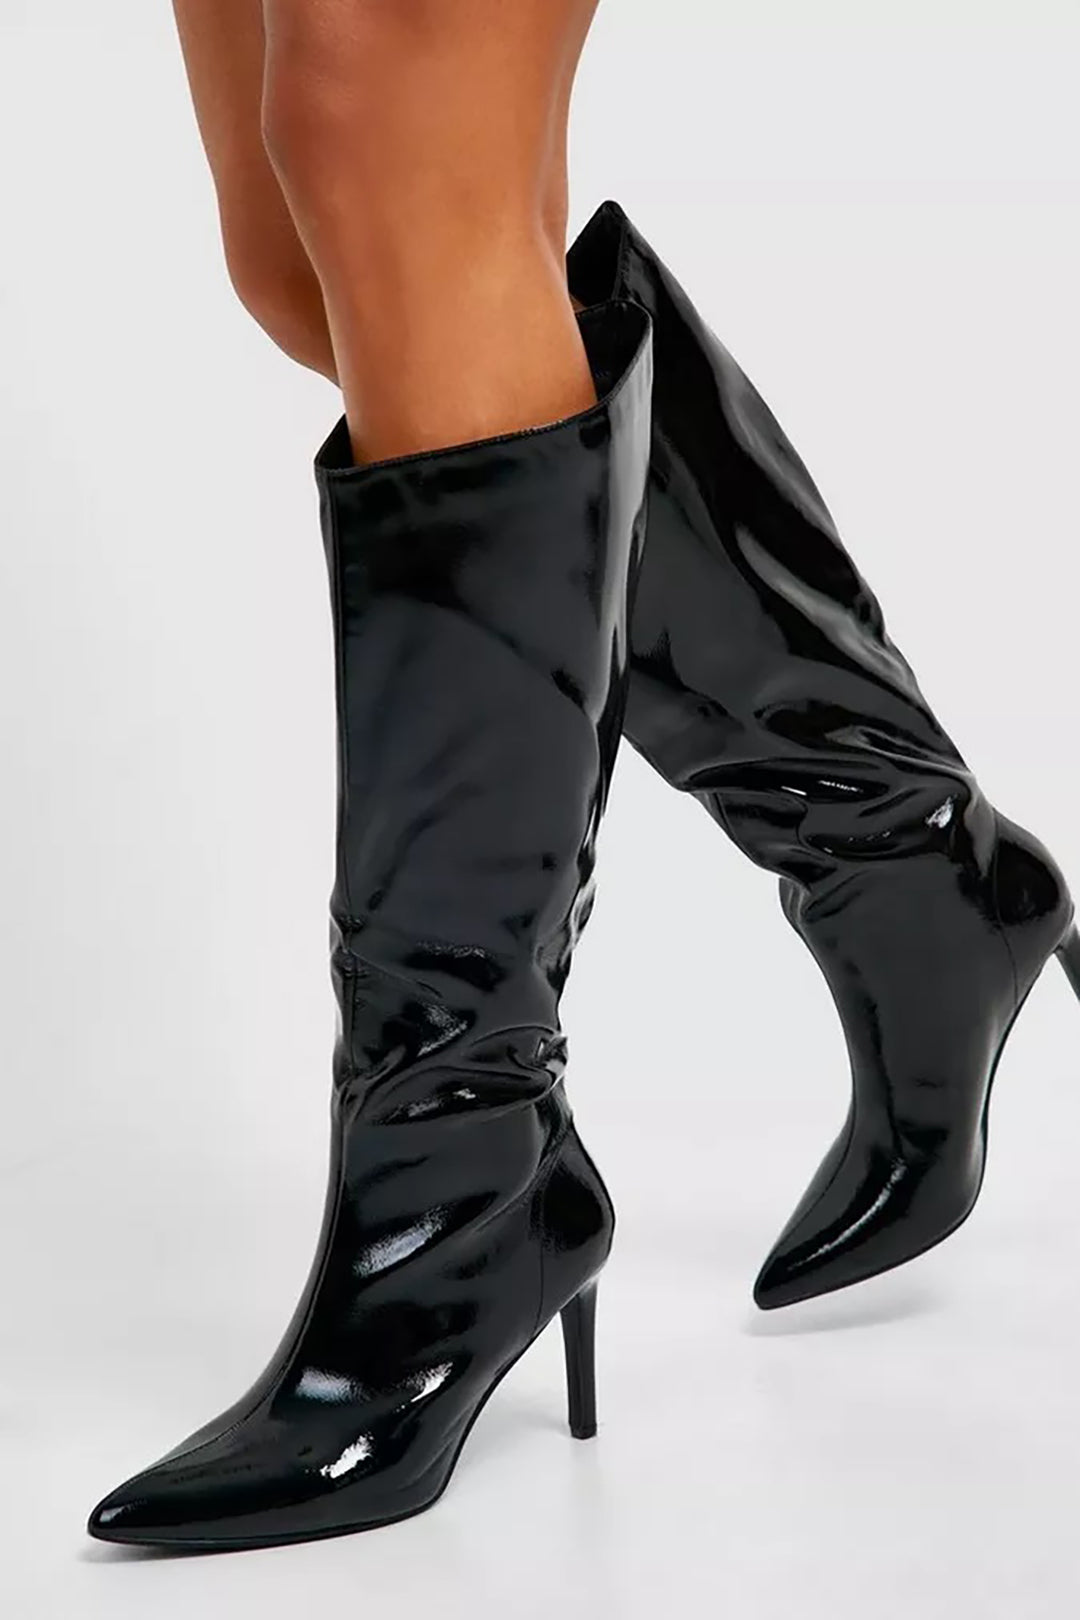 Patent Leather Knee High Pointed Heeled Boots